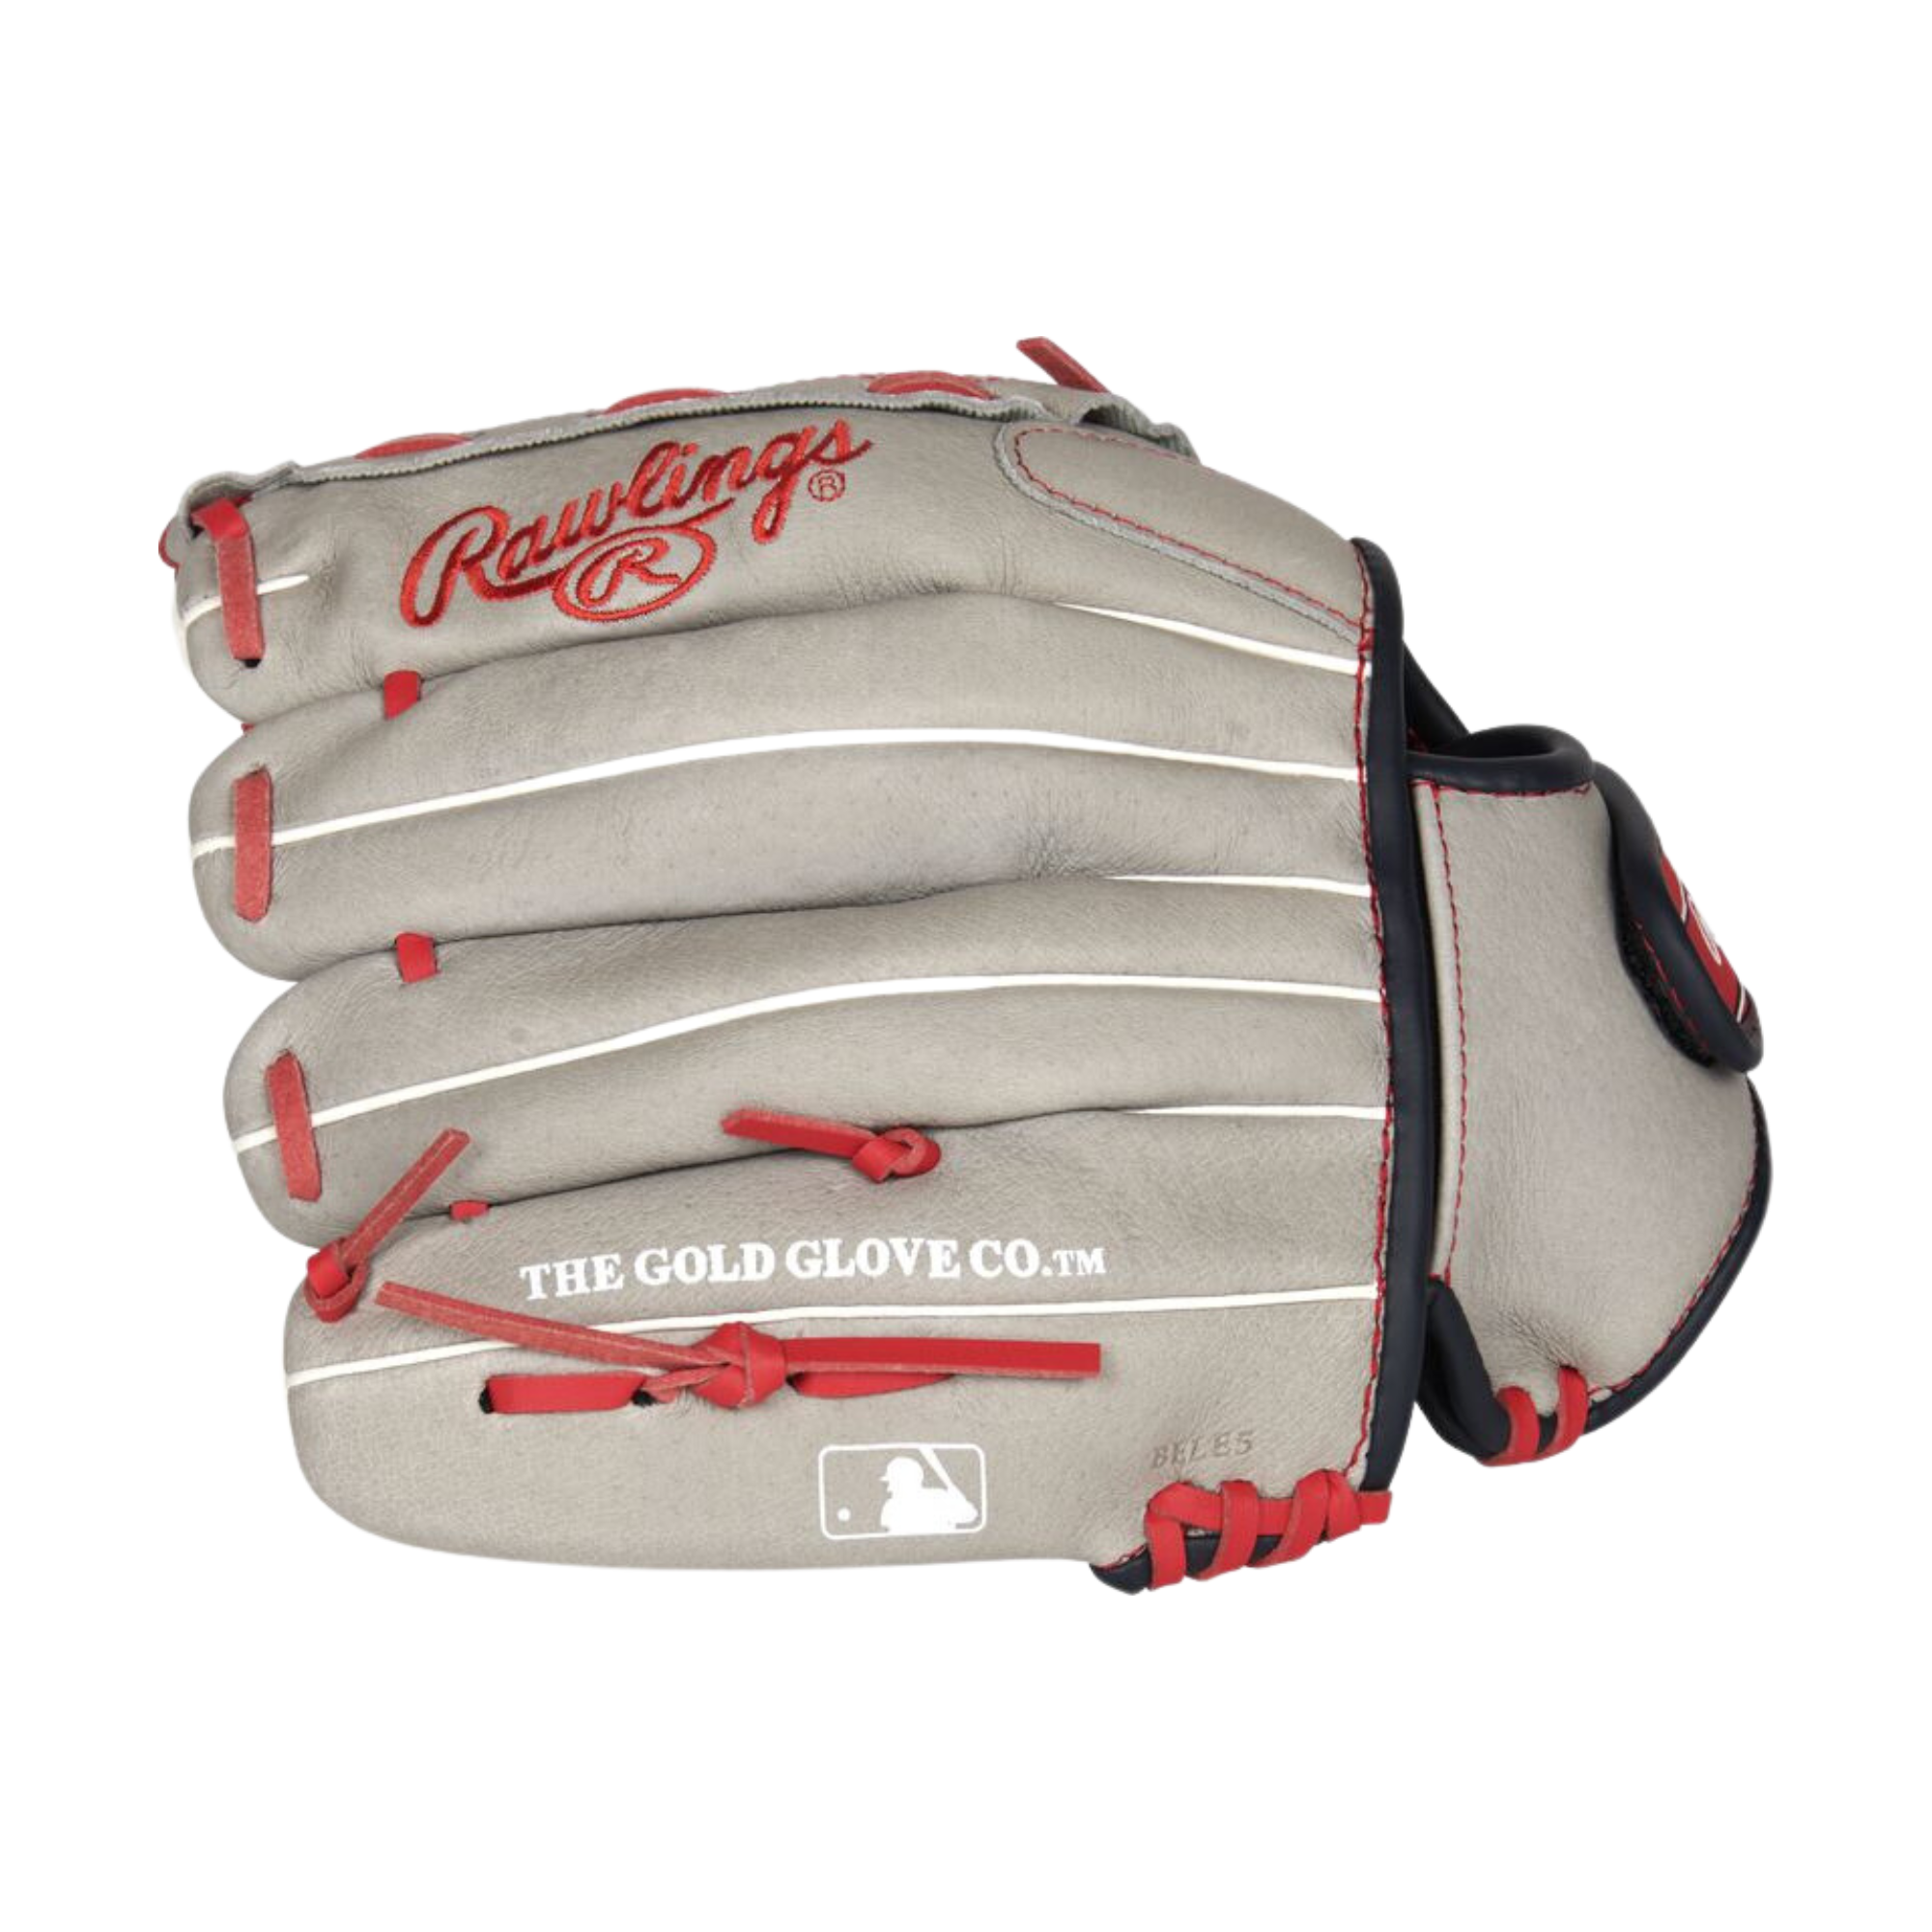 mike trout glove